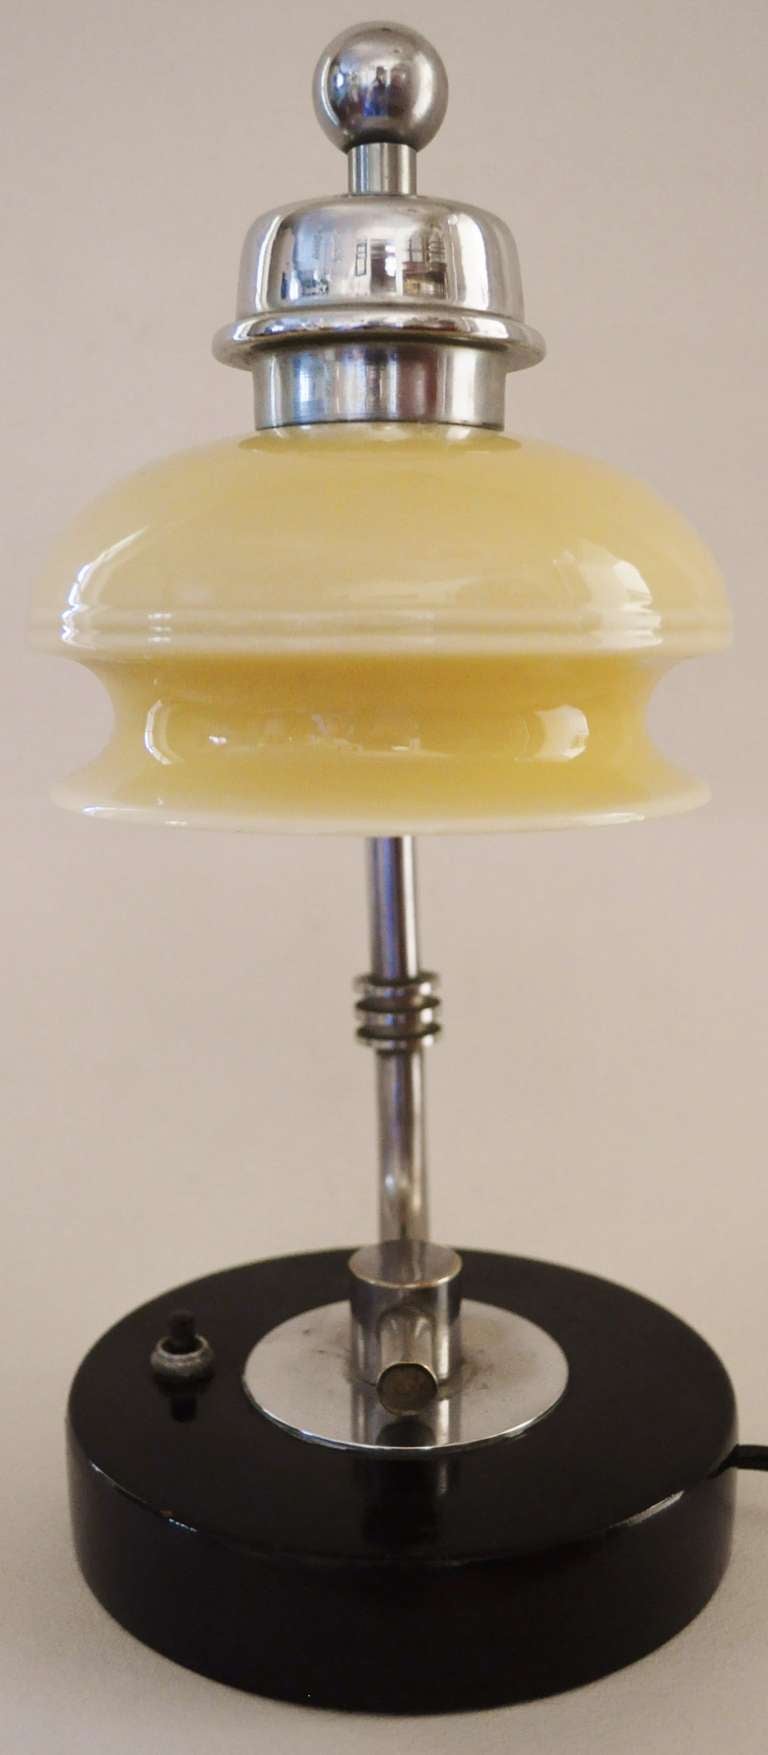 Chrome American Art Deco Small Adjustable Shade Desk or Table Lamp by Gilbert Rohde for the Mutual Sunset Lamp Company.